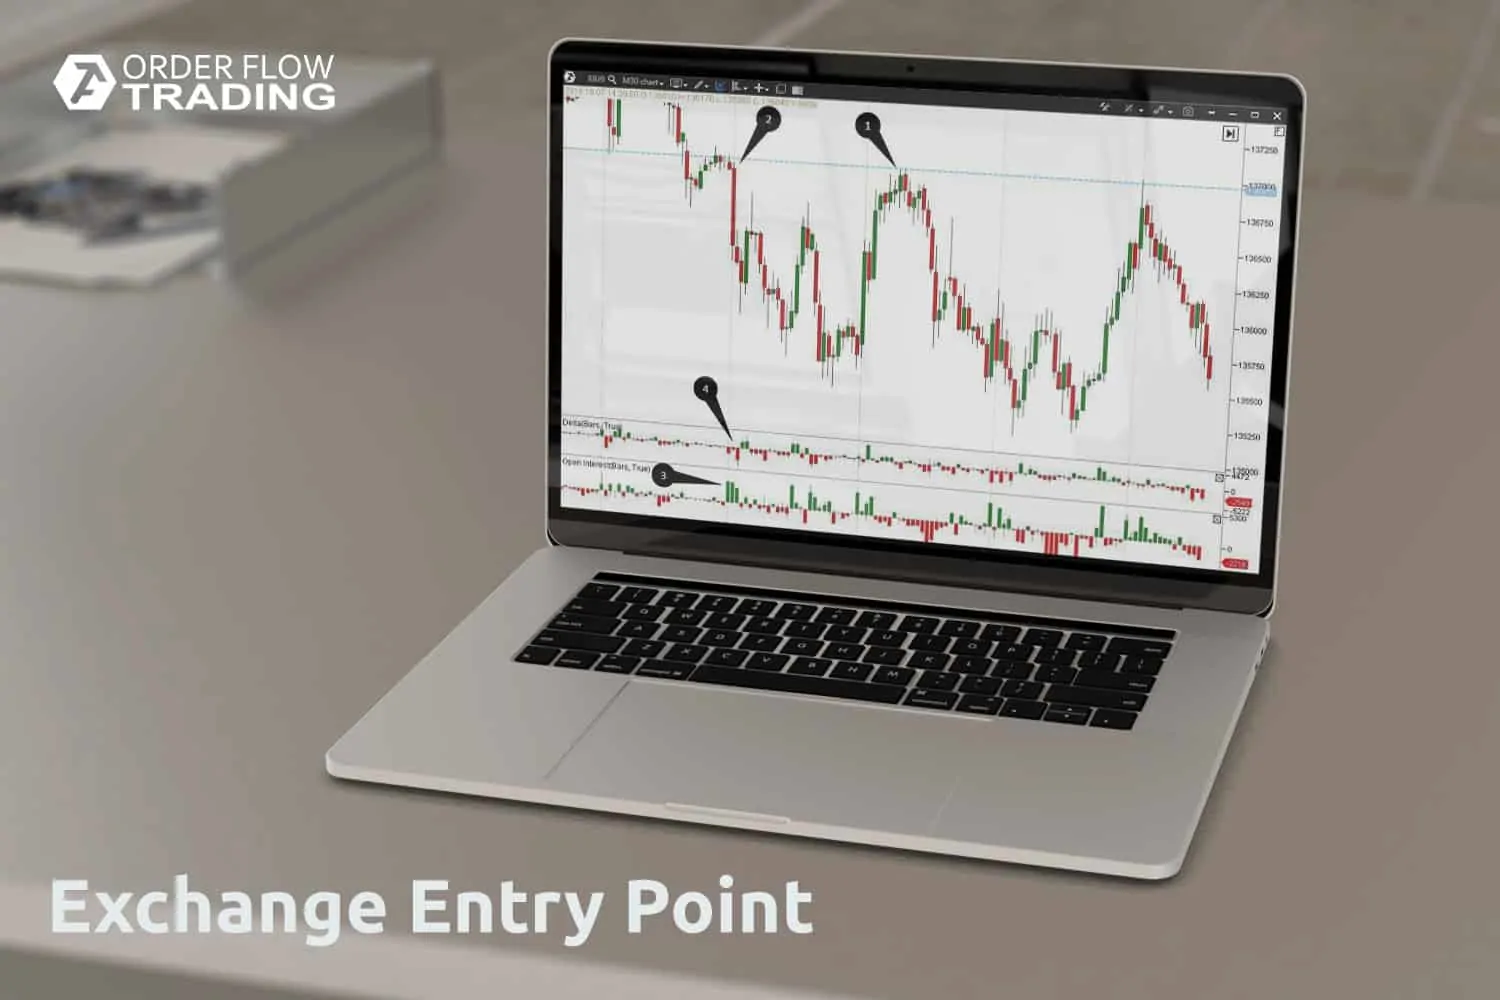 How to identify an entry point on an exchange?